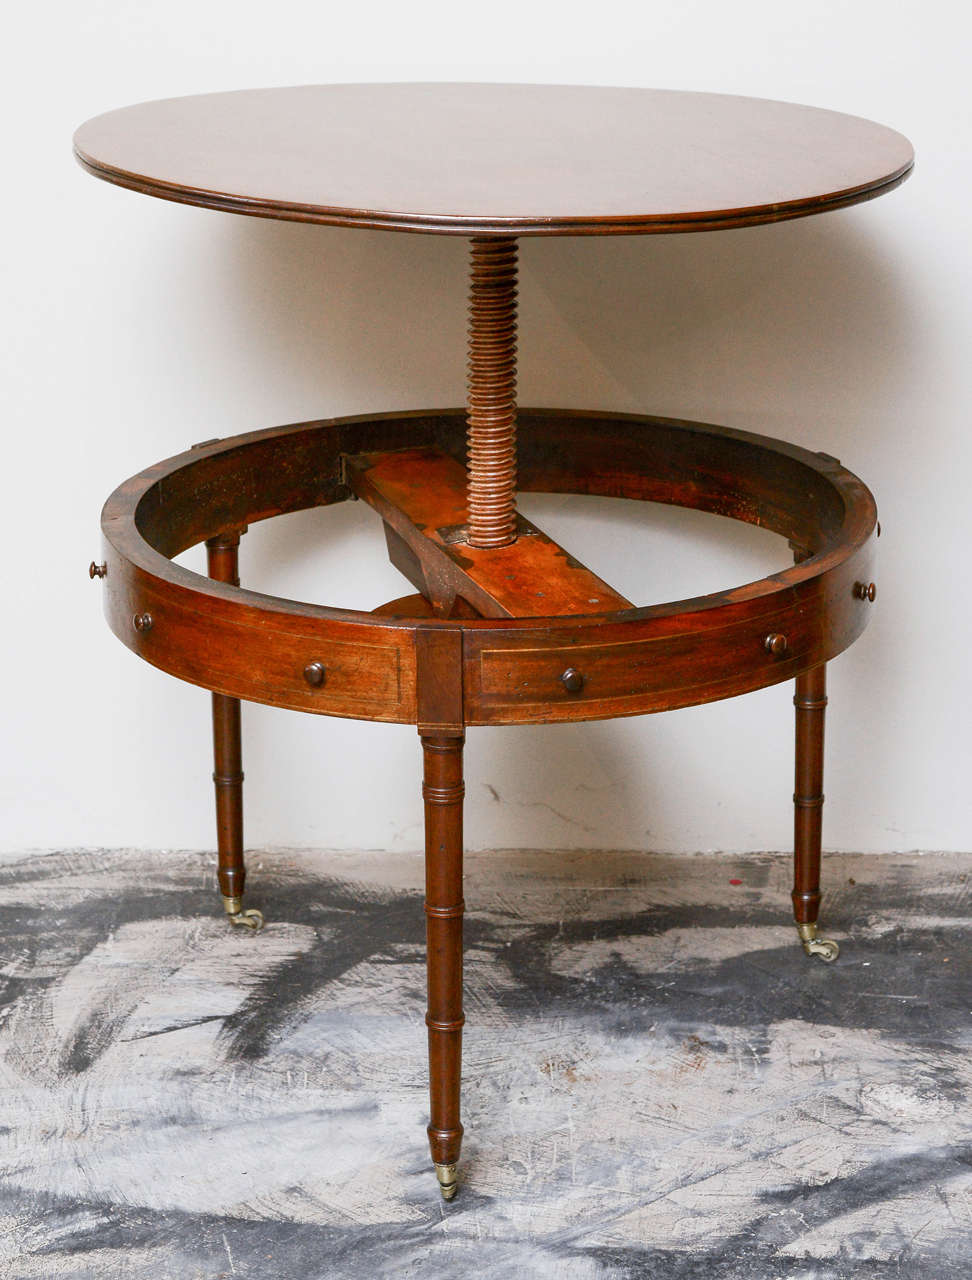 English Style Mahogany Adjustable Mechanical Wine Tasting Table, Circa 1840, with string inlay and faux drawer front decoration.